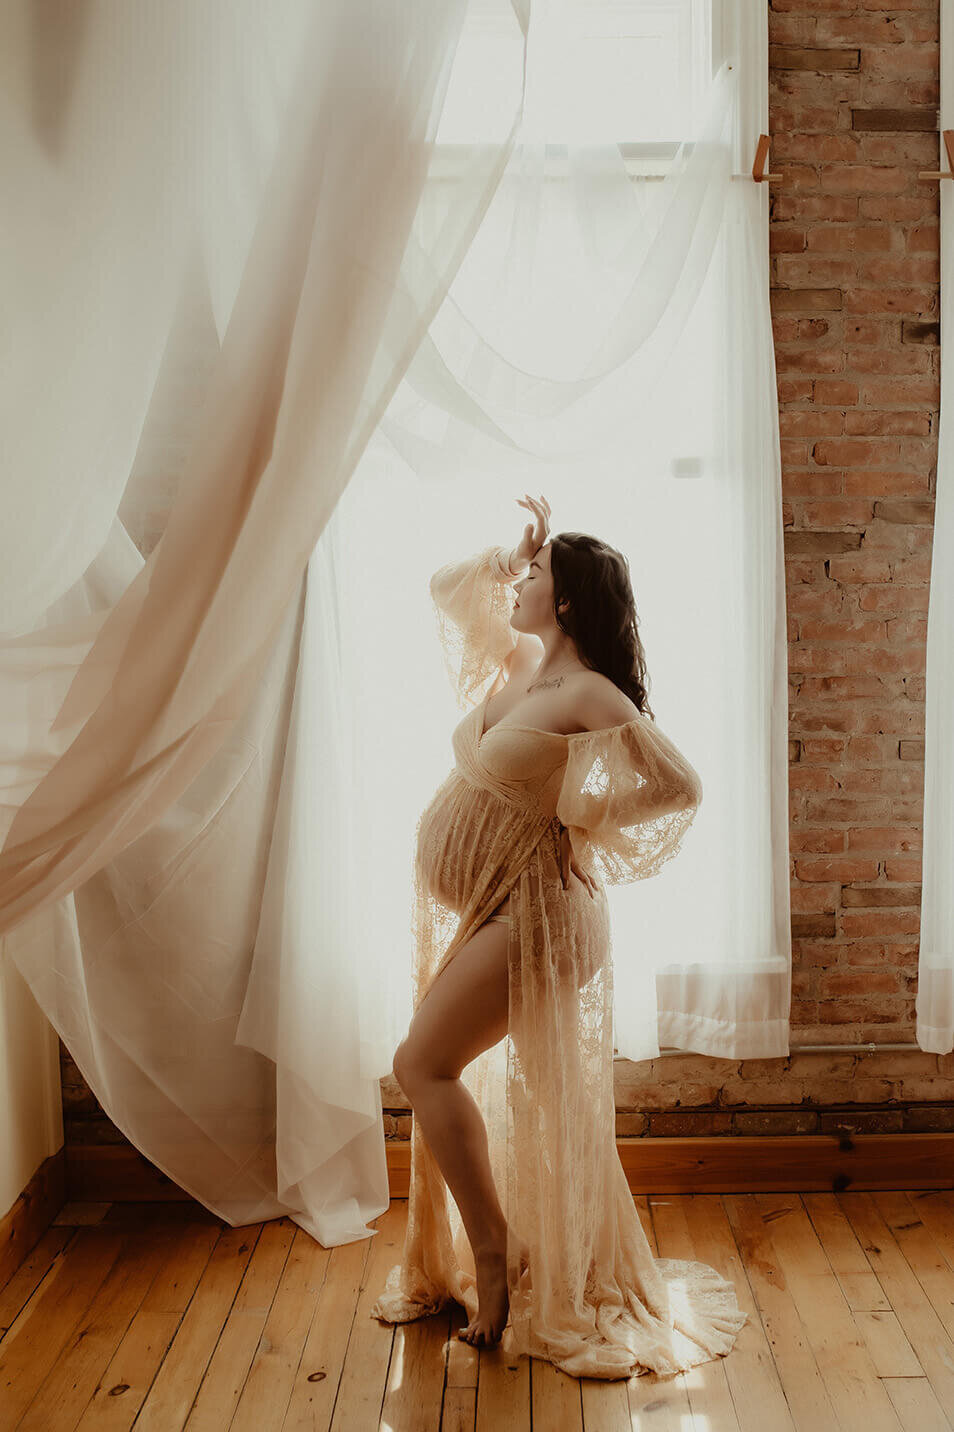 A stunning expectant  mother wearing a cream lace dress standing in front of a window with her hand on her forehead